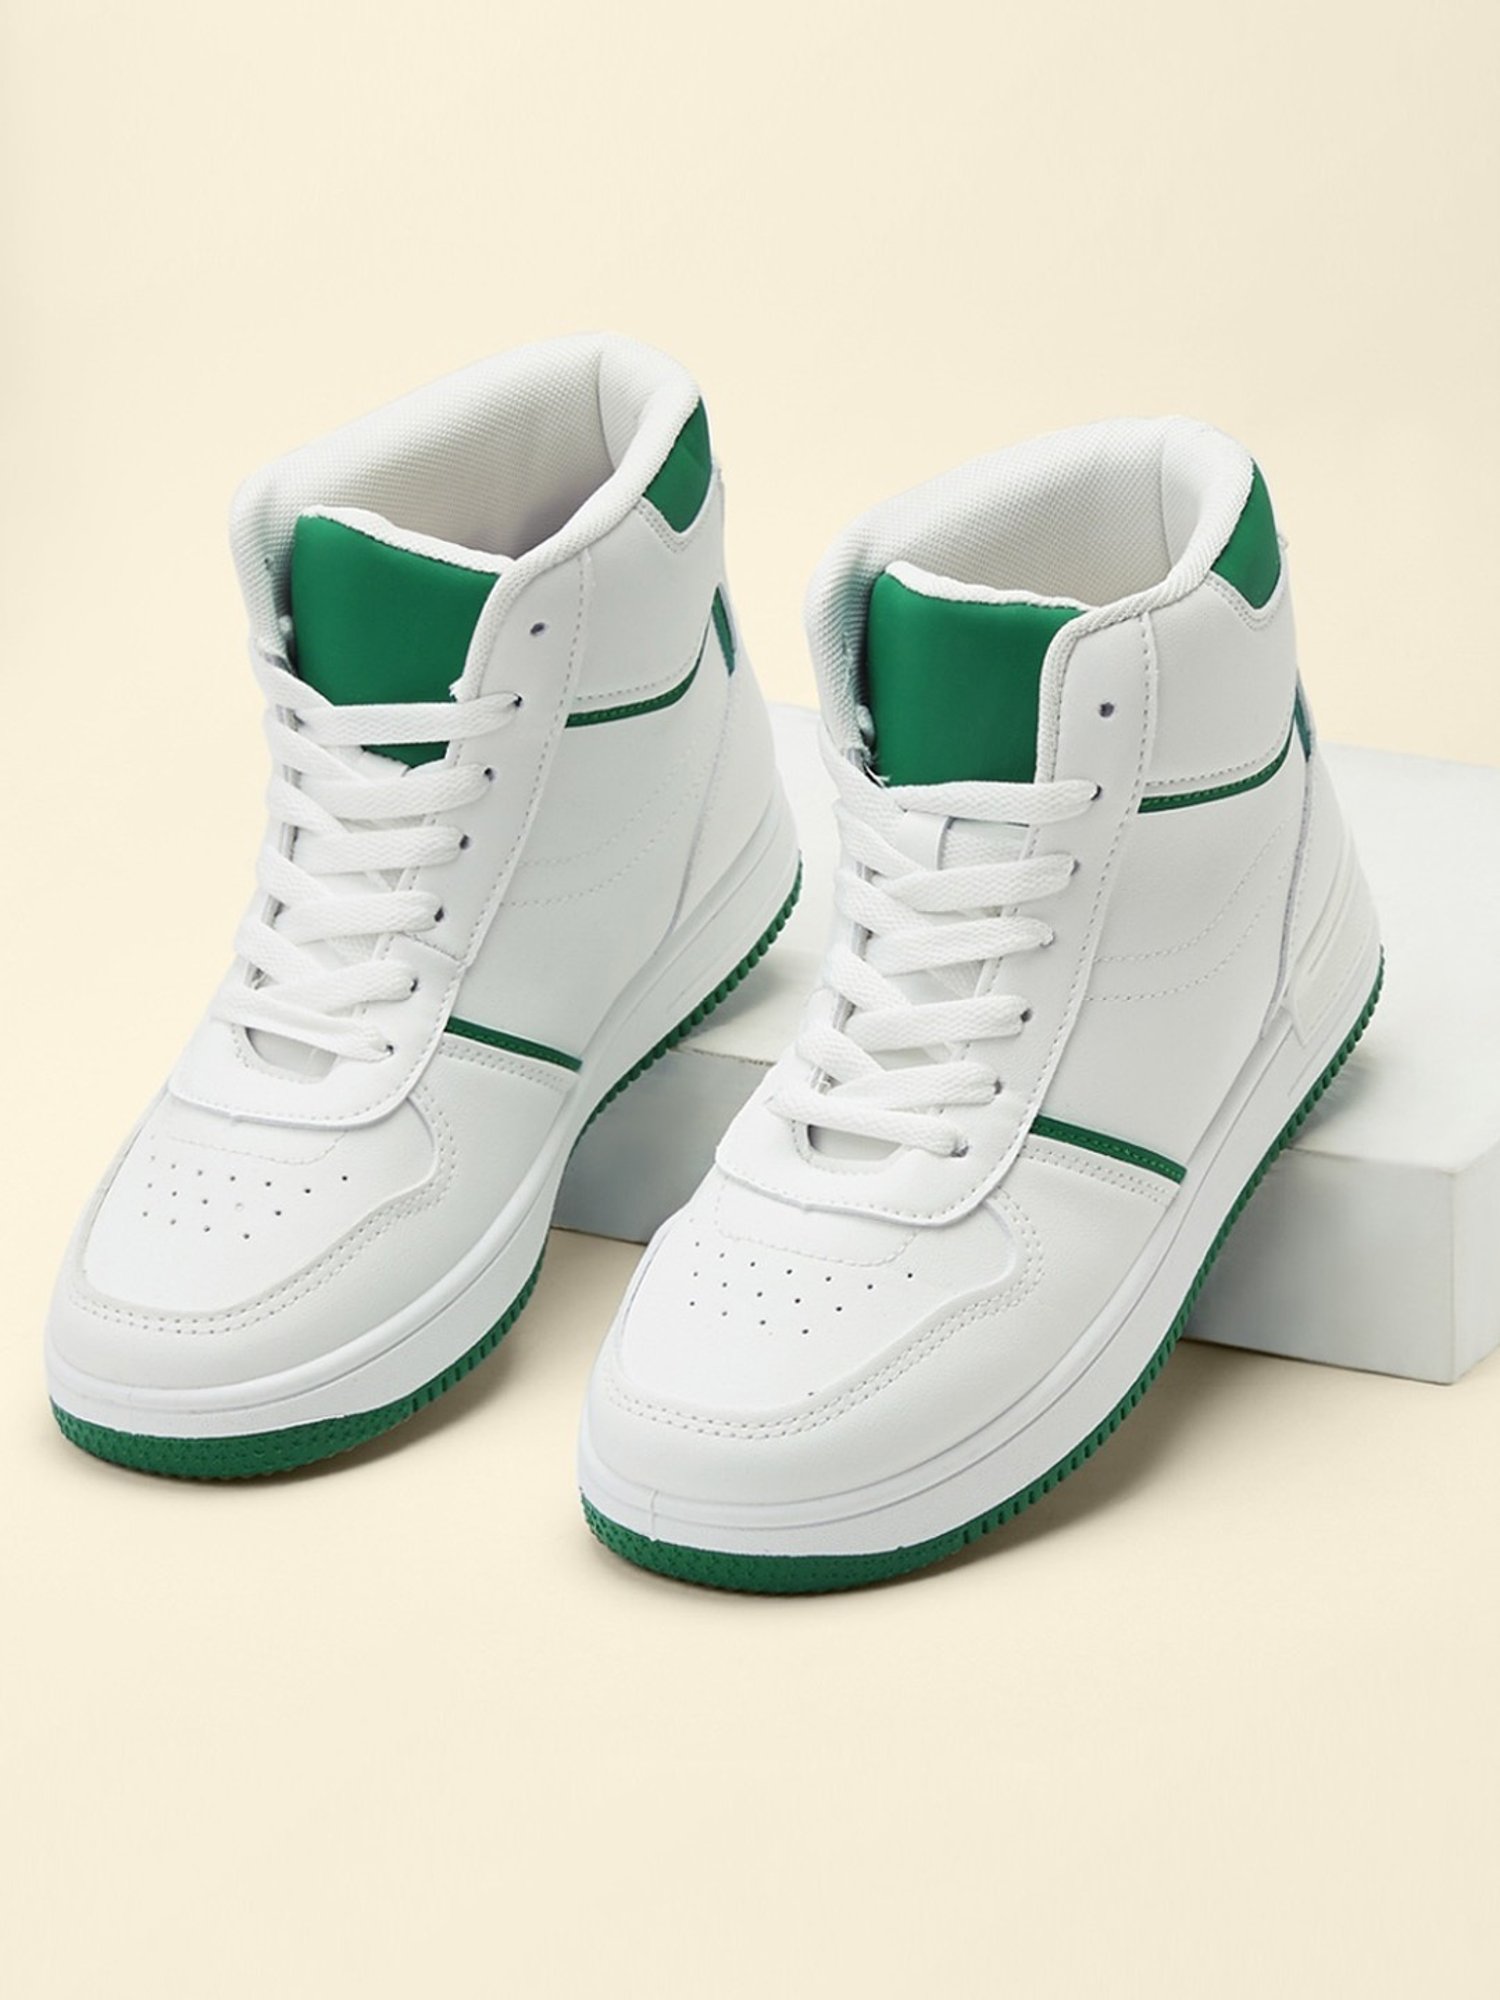 Details 112+ white high ankle sneakers super hot